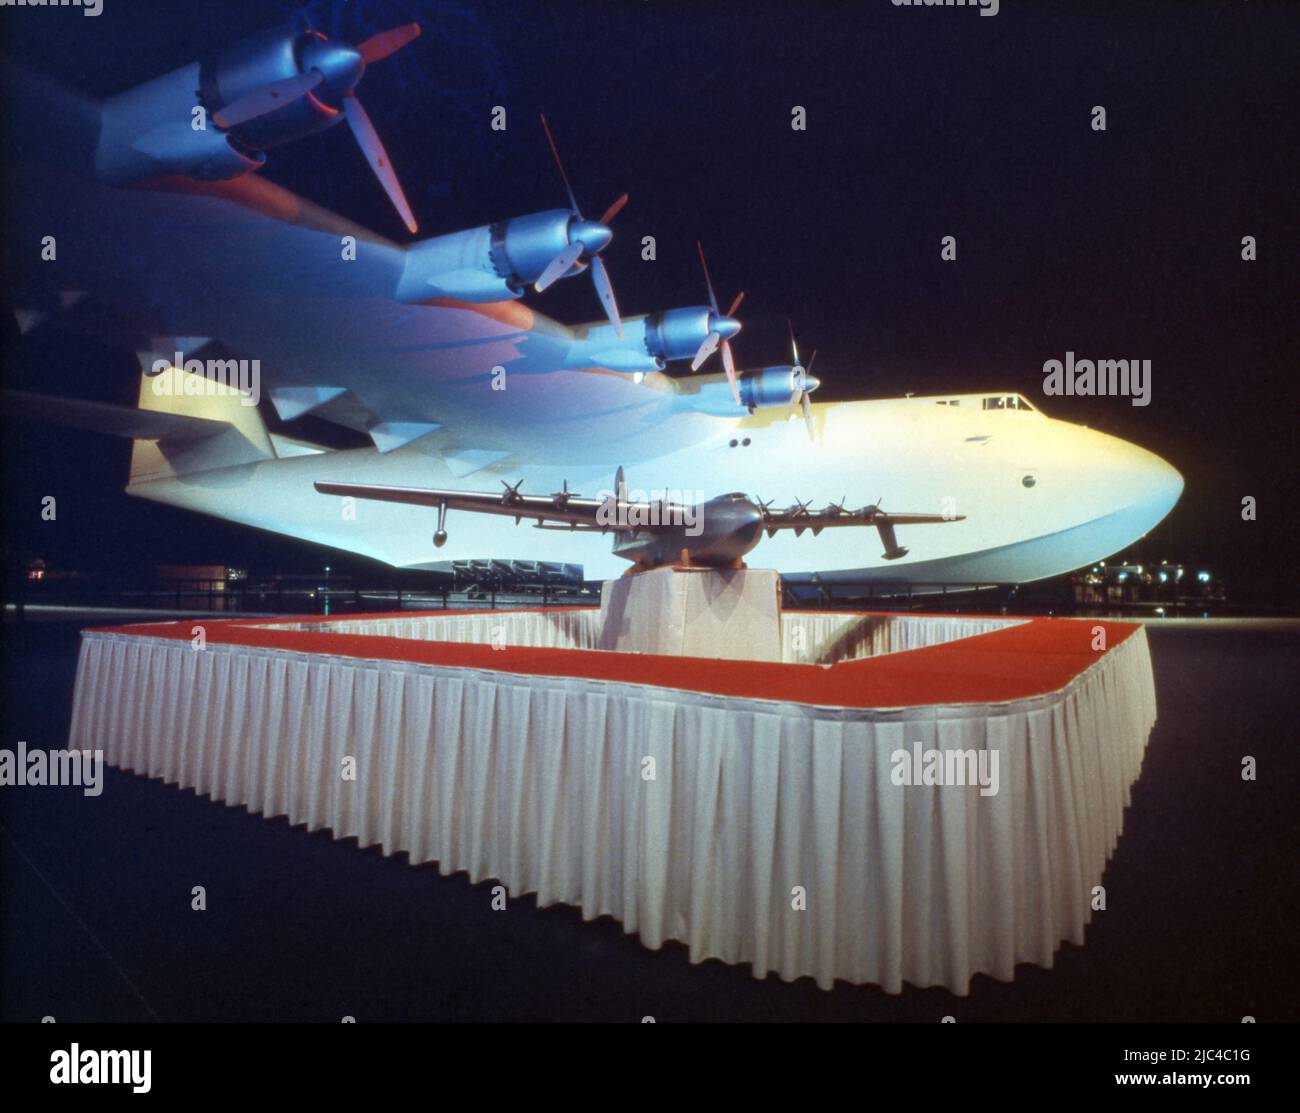 The Spruce Goose on display in Long Beach, California, United States of America Stock Photo